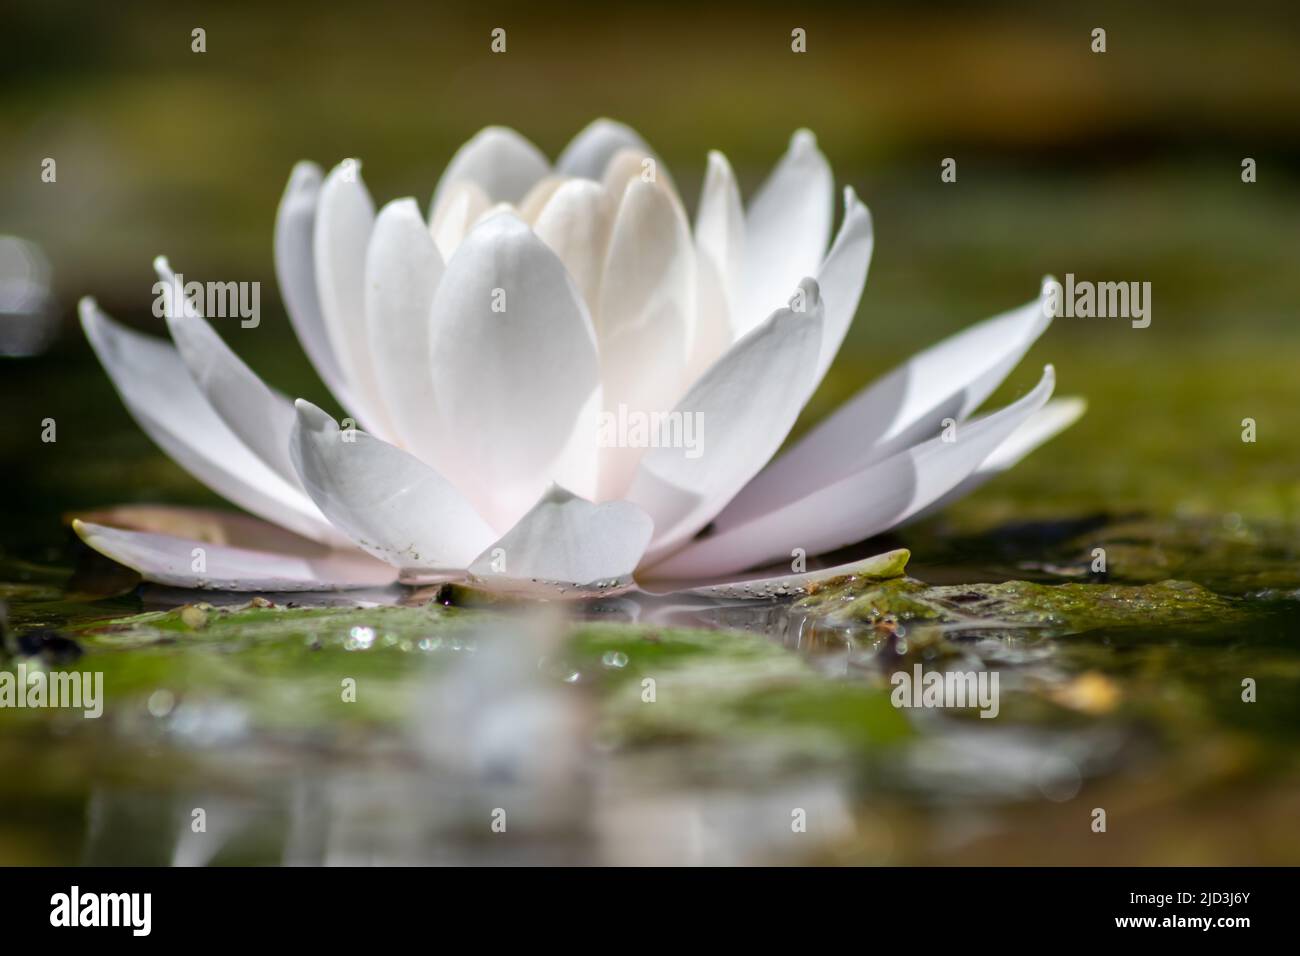 Tropical beautiful water lily in full blow on a tranquil water surface with clear and meditative reflection shows zen meditation and buddhism Stock Photo